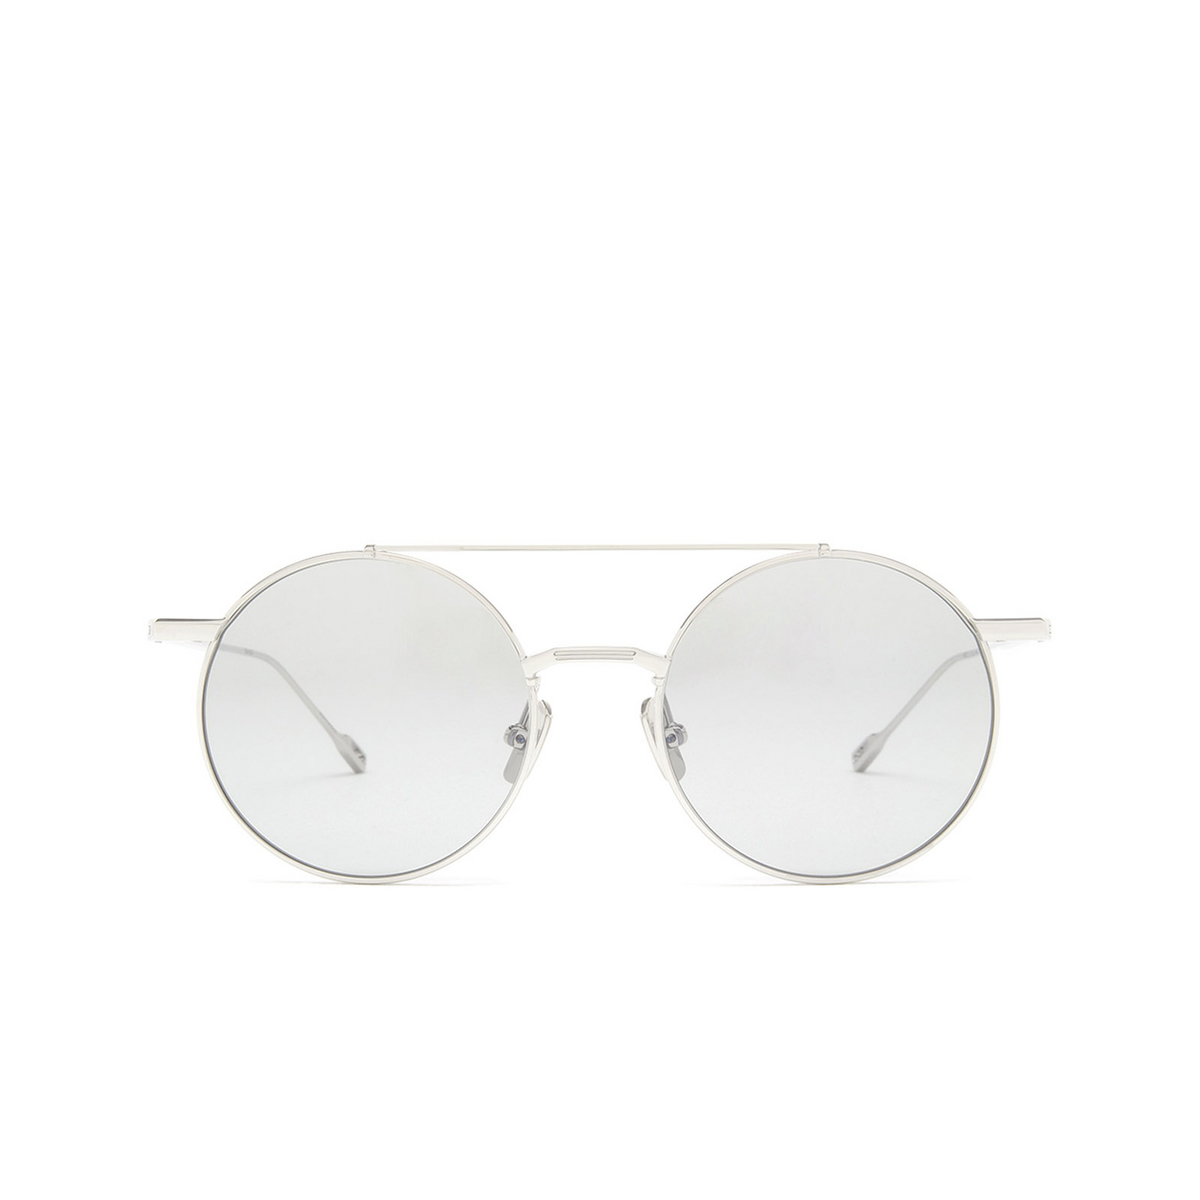 Native Sons® Round Sunglasses: Aston Exp color Silver - front view.